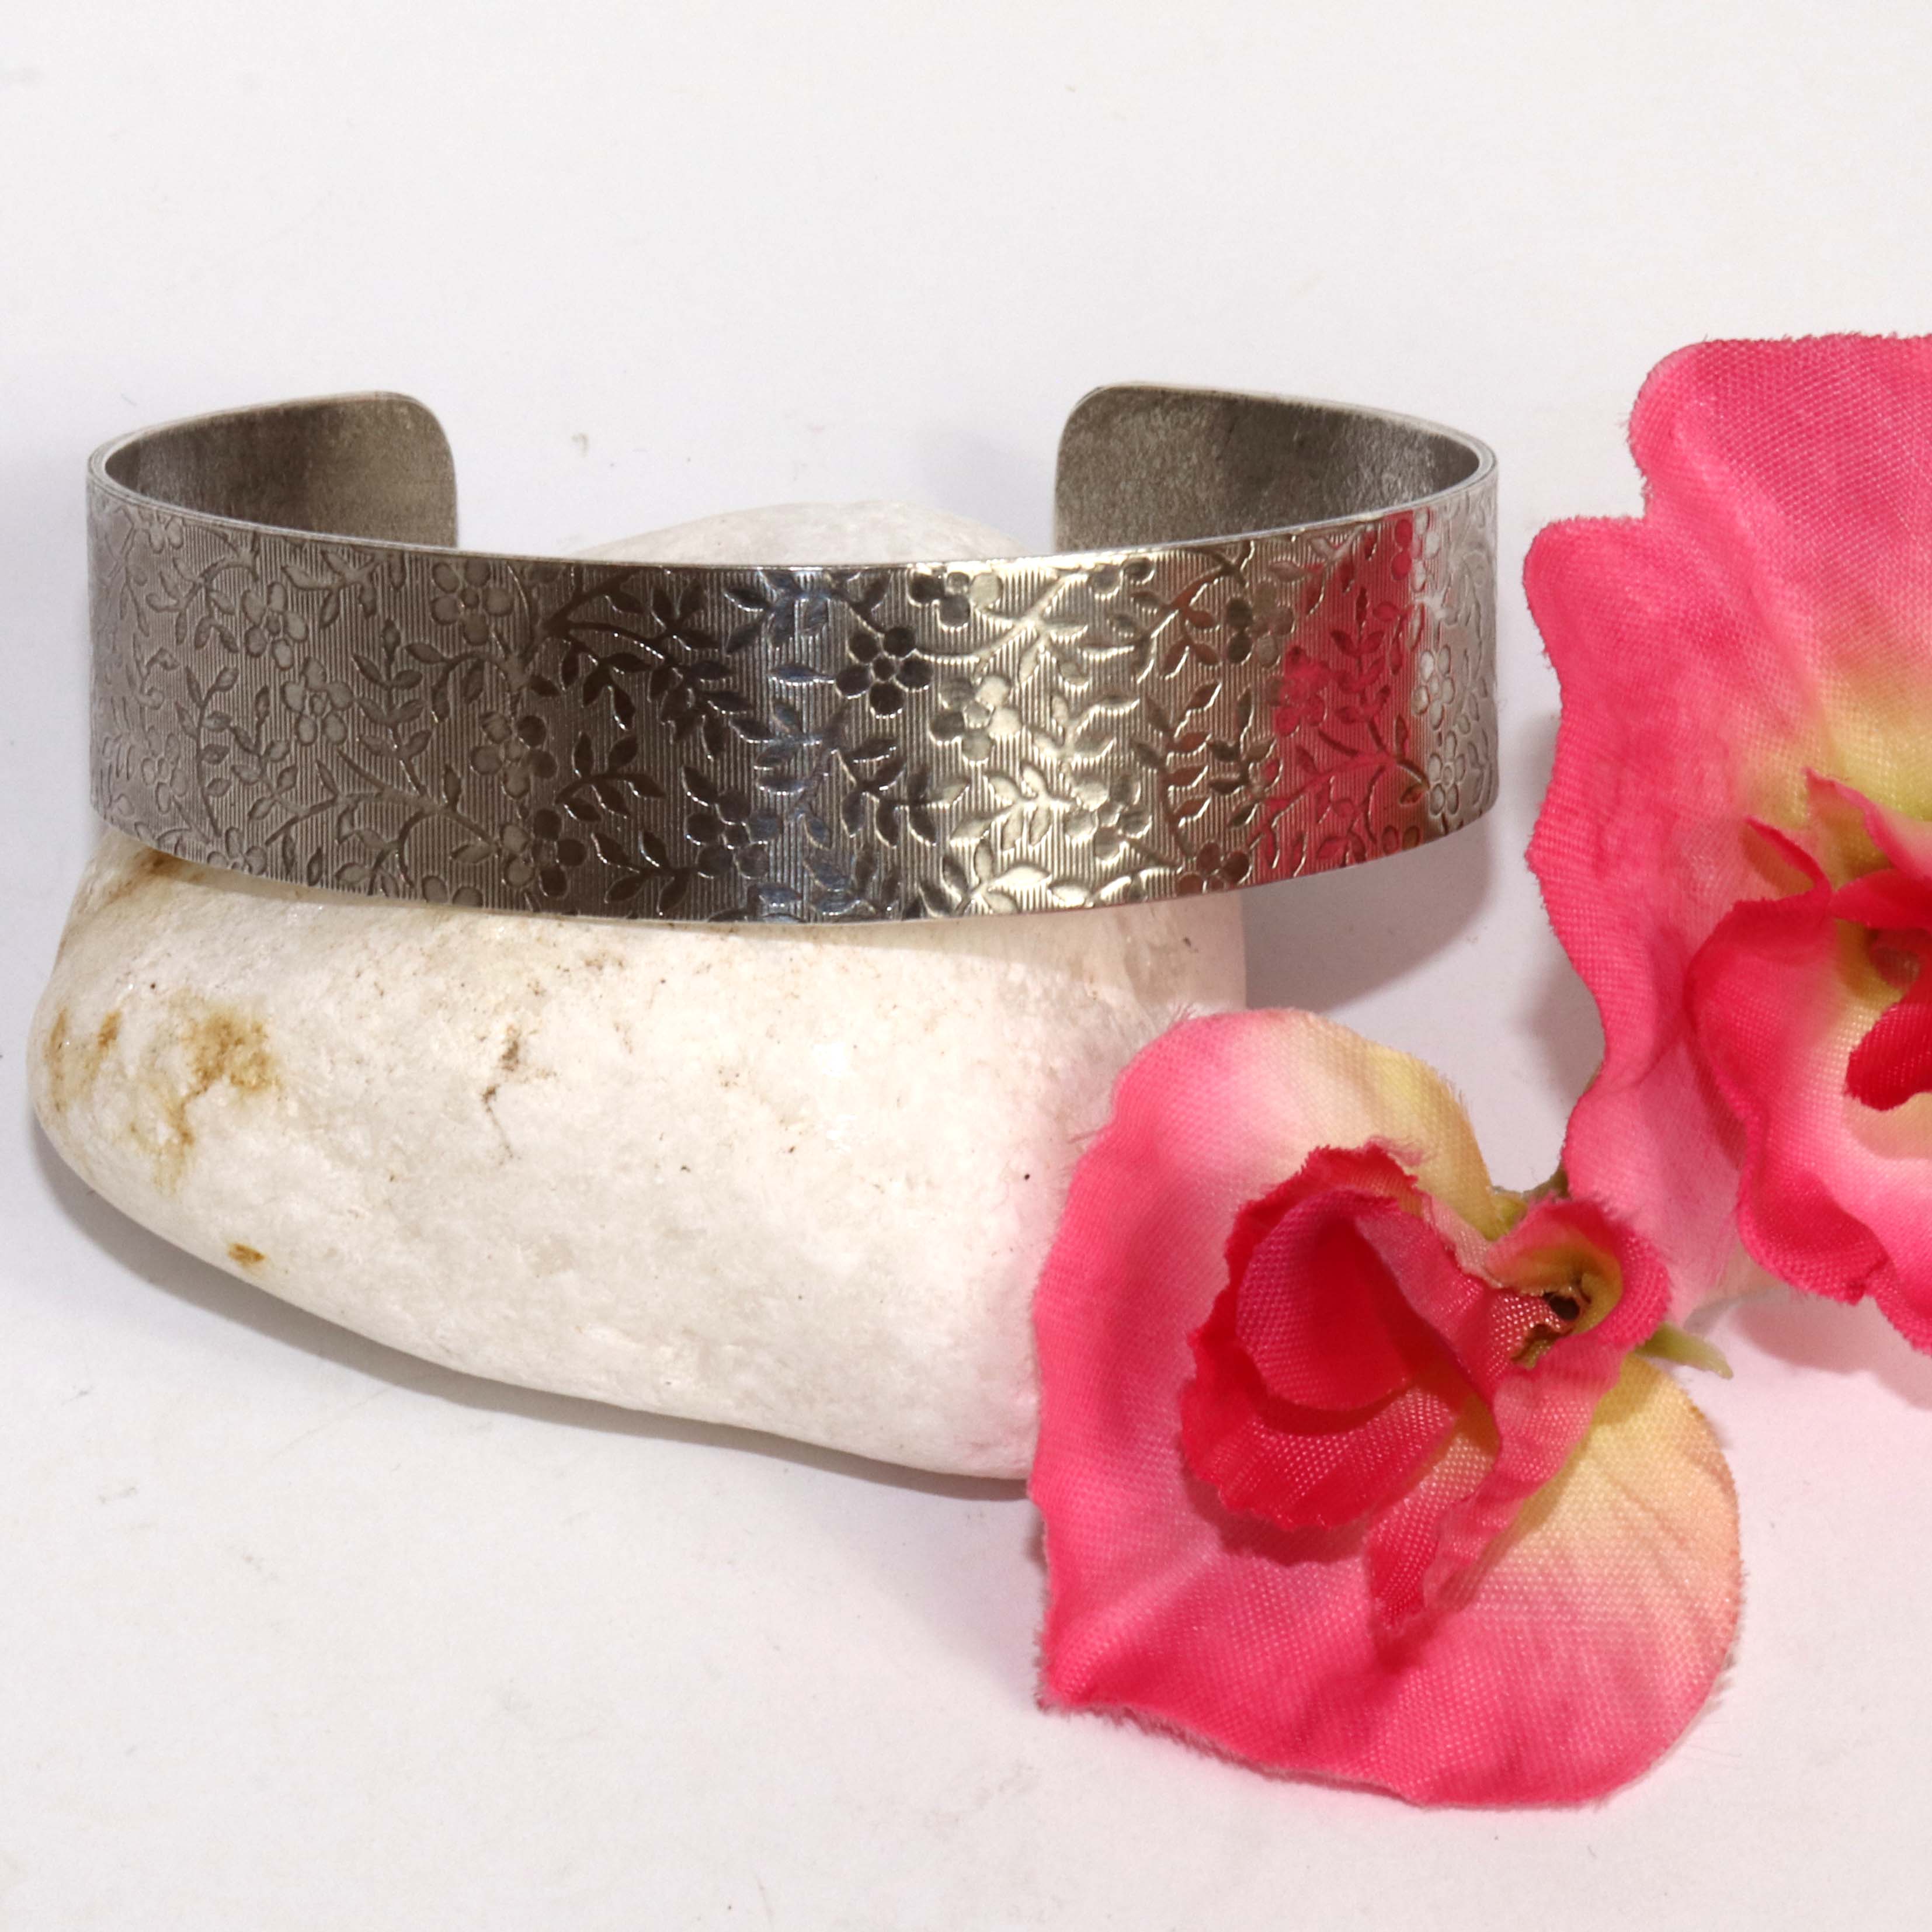 Embossed Floral Design Cuff Bracelet With Patina Finish